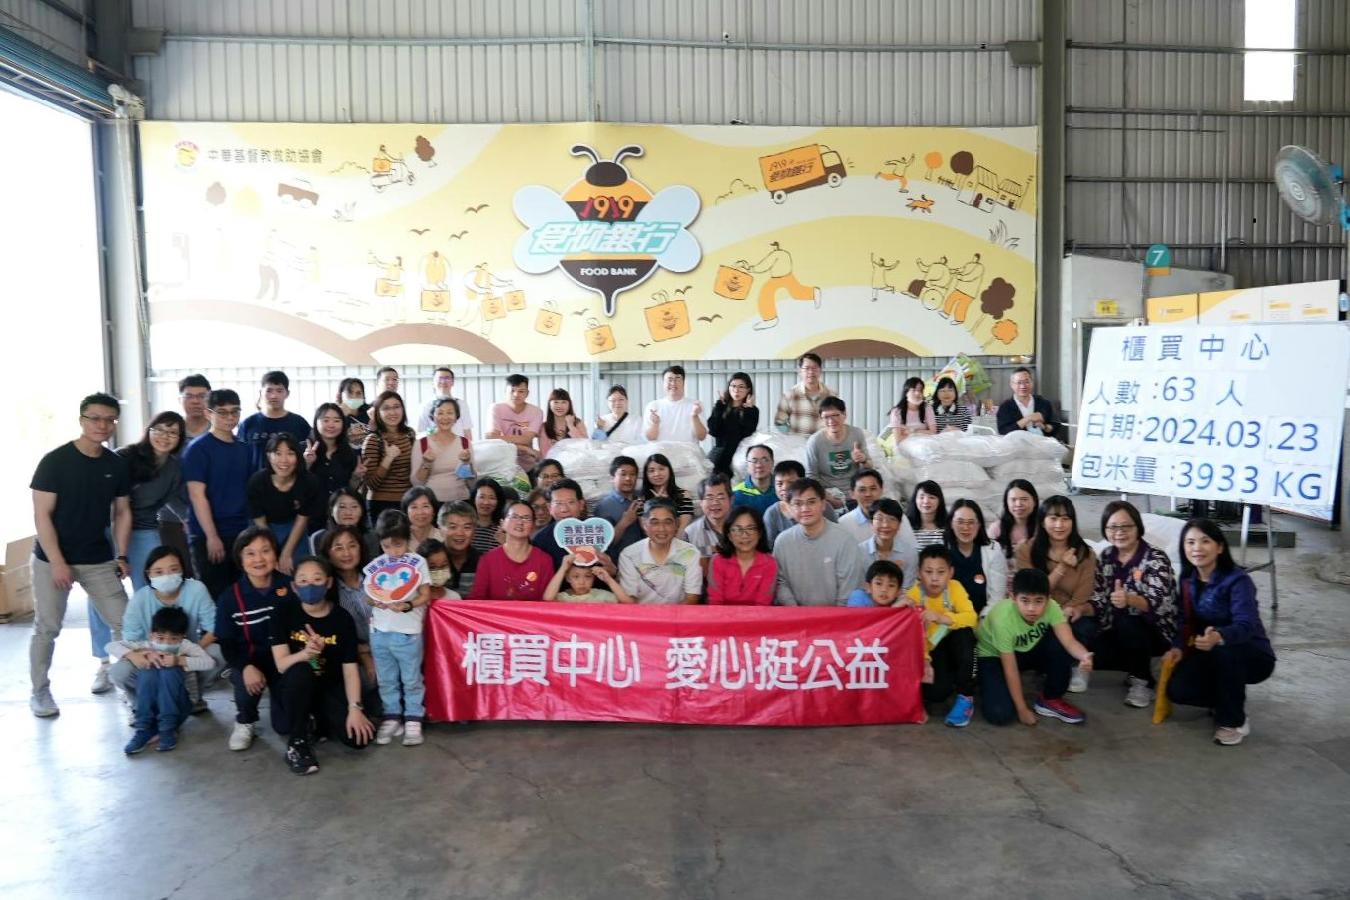 Taipei Exchange (TPEx) assisted the 1919 Food Bank in packing for delivery to disadvantaged families to ease their burdens.